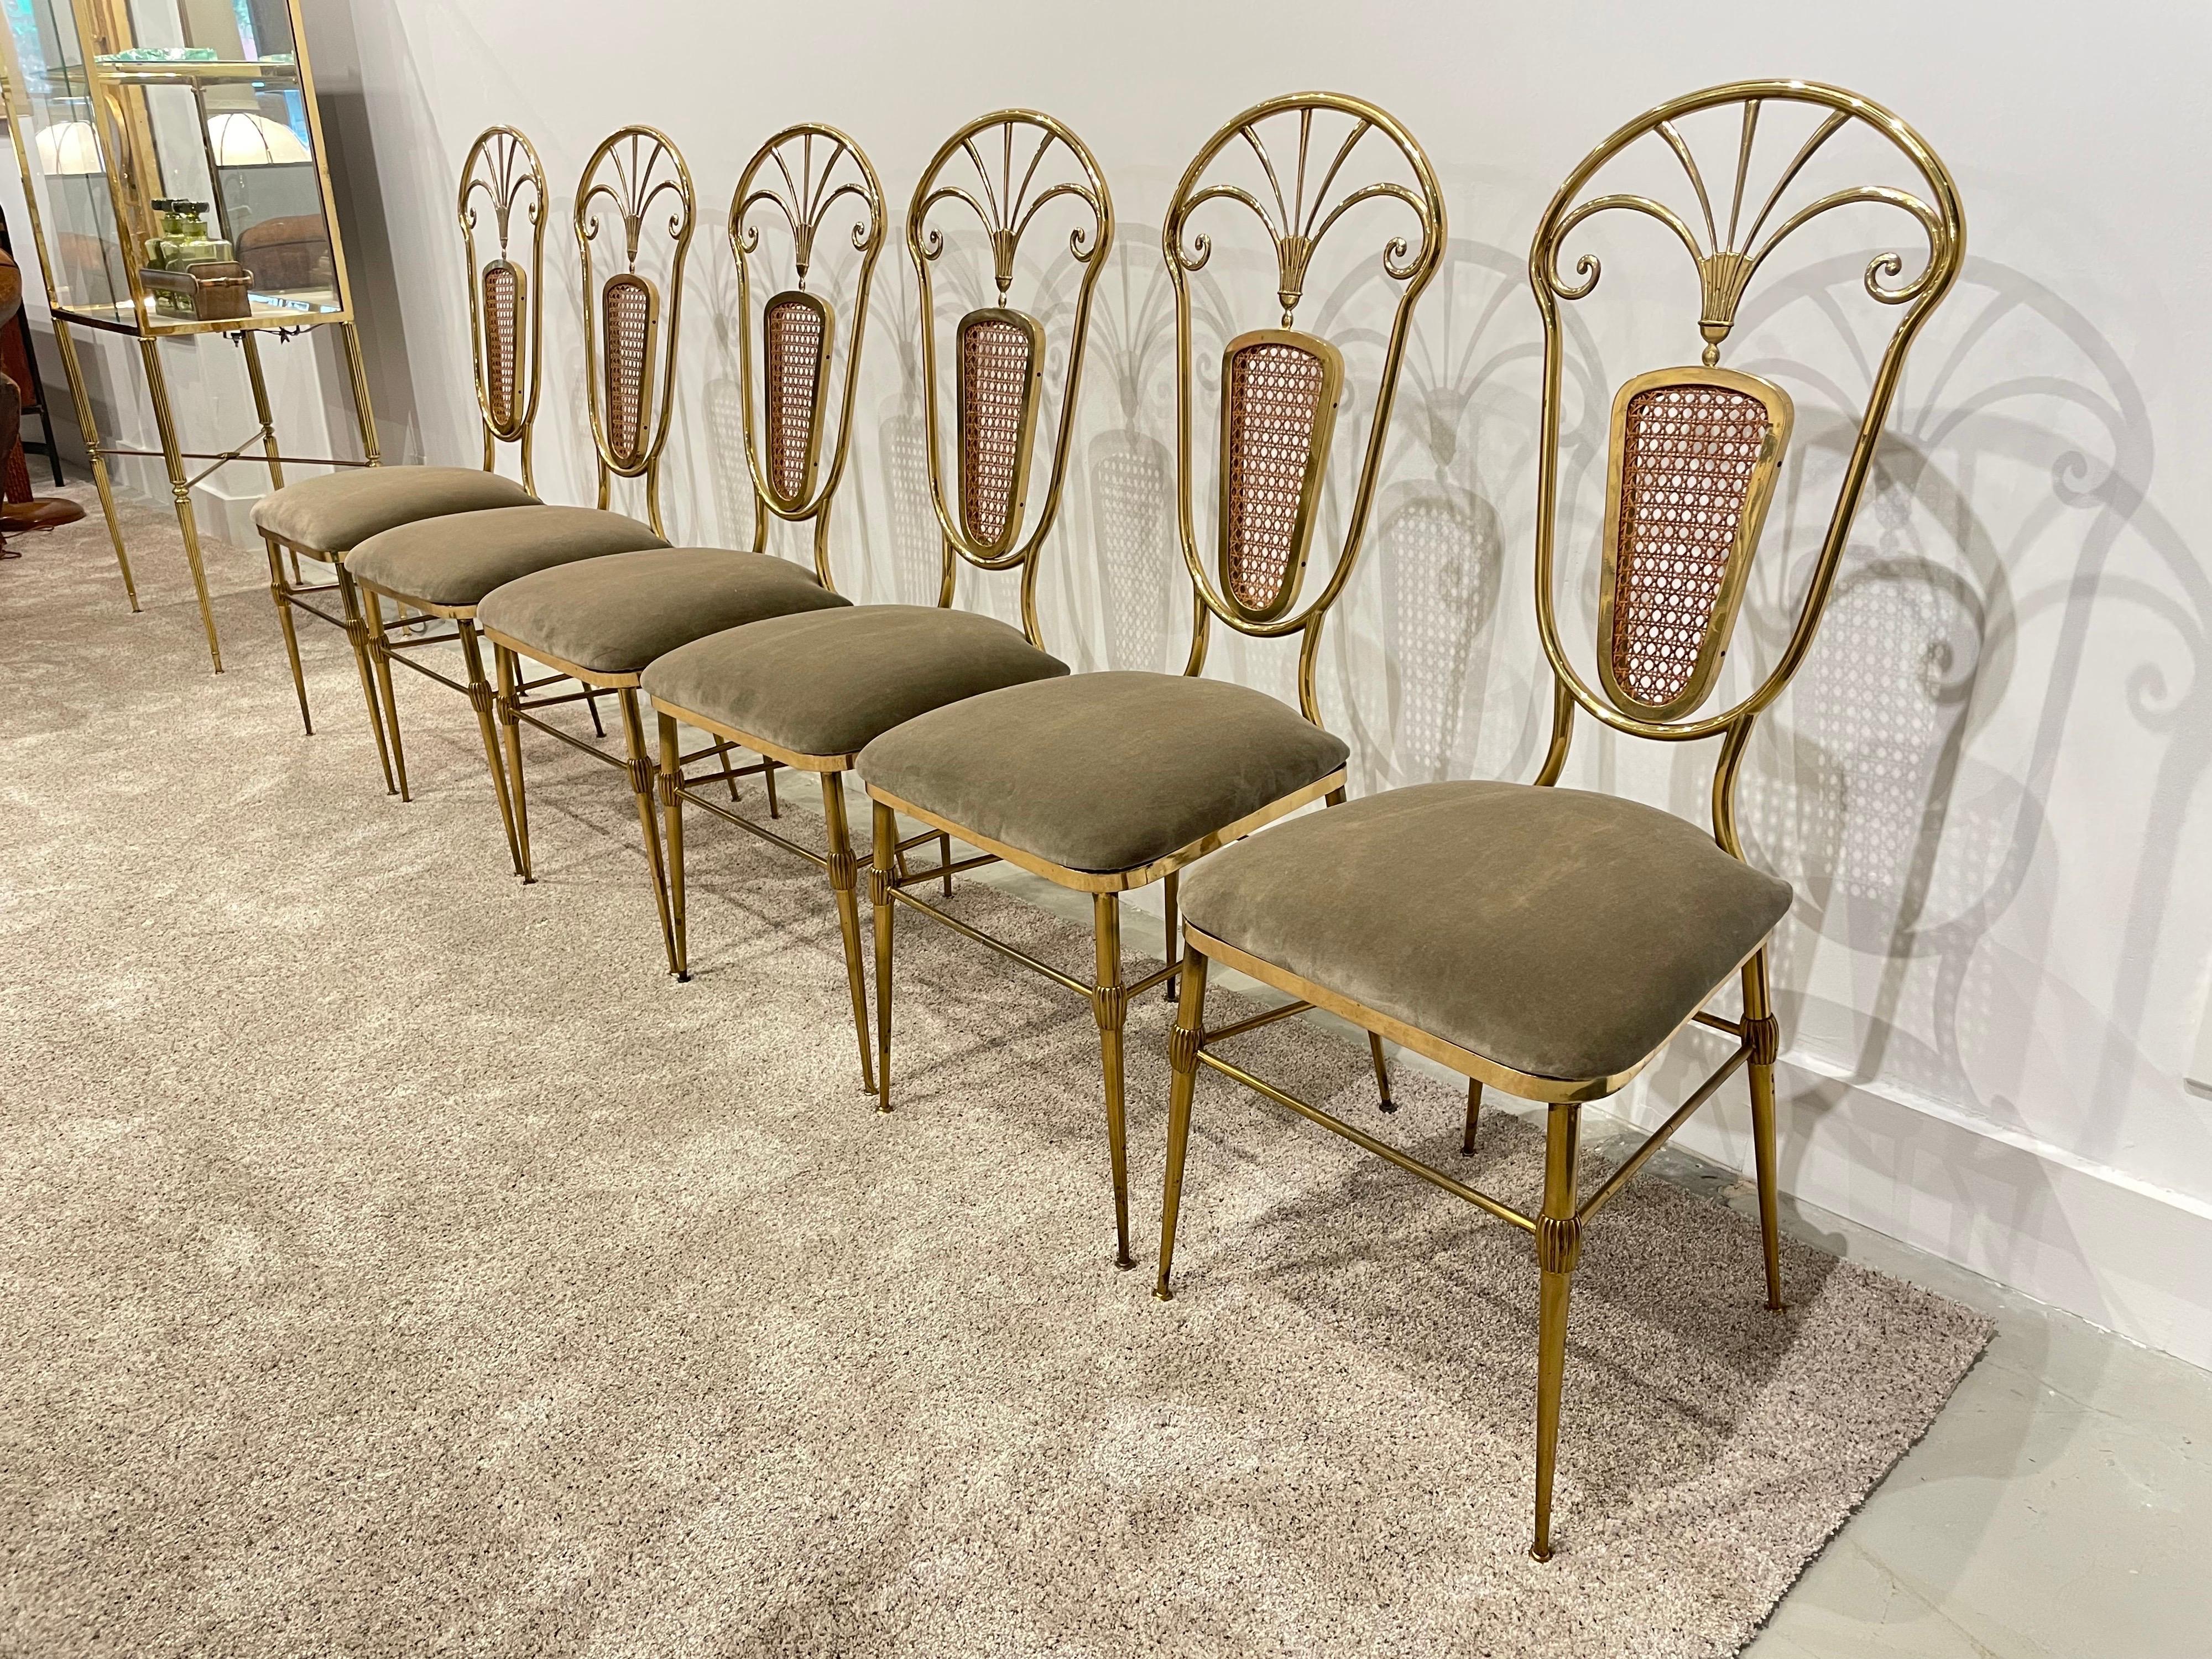 Wonderful brass dining chairs with wicker mesh accent to backrest and lovely details to legs and throughout. Newly upholstered in a mohair velvet fabric. Sold as a set of 6. Marked 